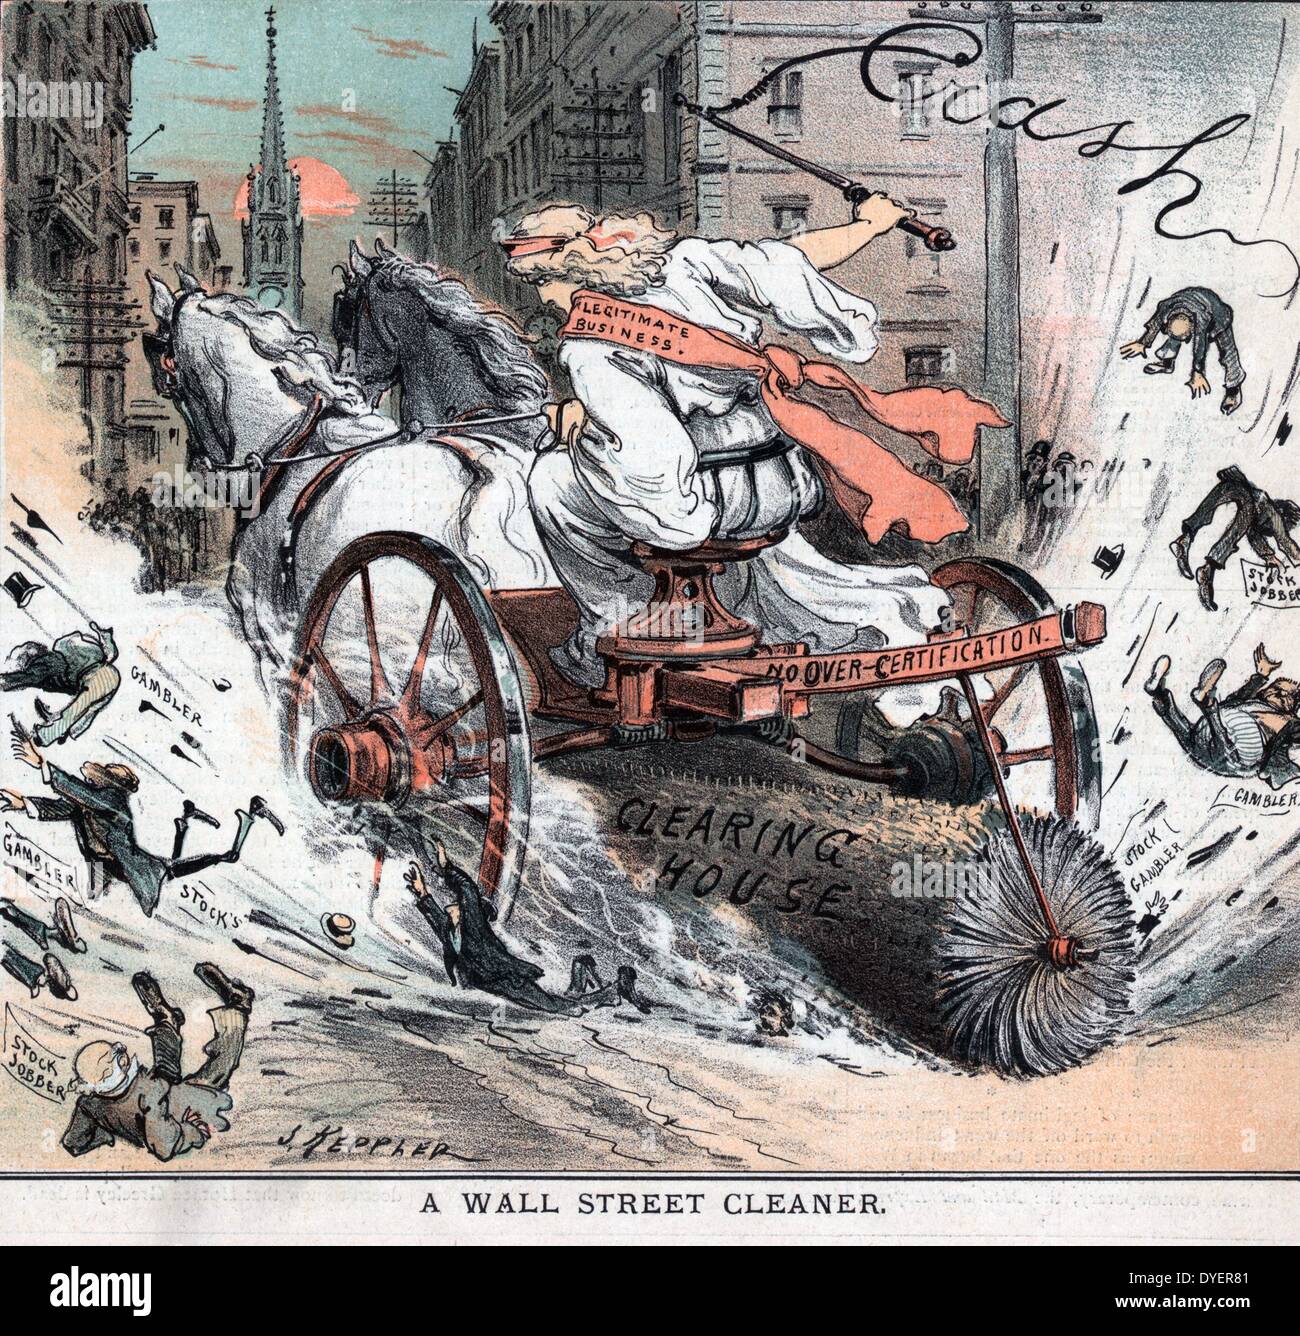 Wall Street cleaner by Joseph Ferdinand Keppler, 1838-1894, artist. Published 1884. Illustration shows a woman labelled 'Legitimate Business' cracking a whip that spells 'Crash', driving a two-wheeled cart drawn by two horses with a large brush labelled 'No Over-Certification Clearing House' attached, sweeping Wall Street clean of men labelled 'Stock Jobber' and 'Stock Gambler'. Stock Photo